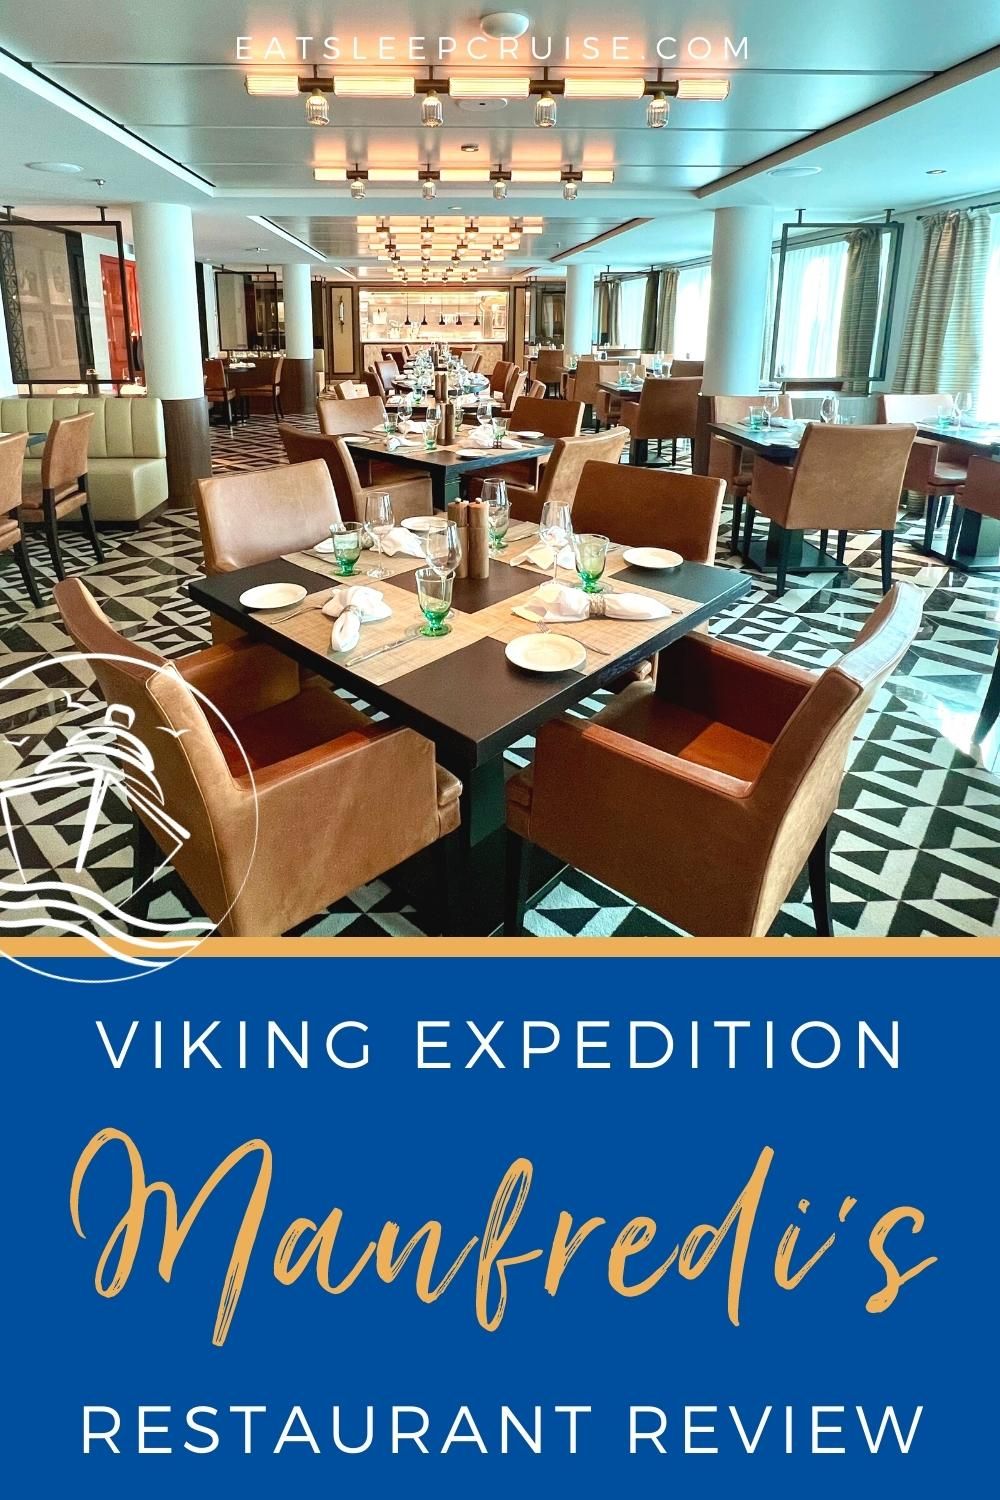 Viking Expedition Manfredi's Restaurant Review